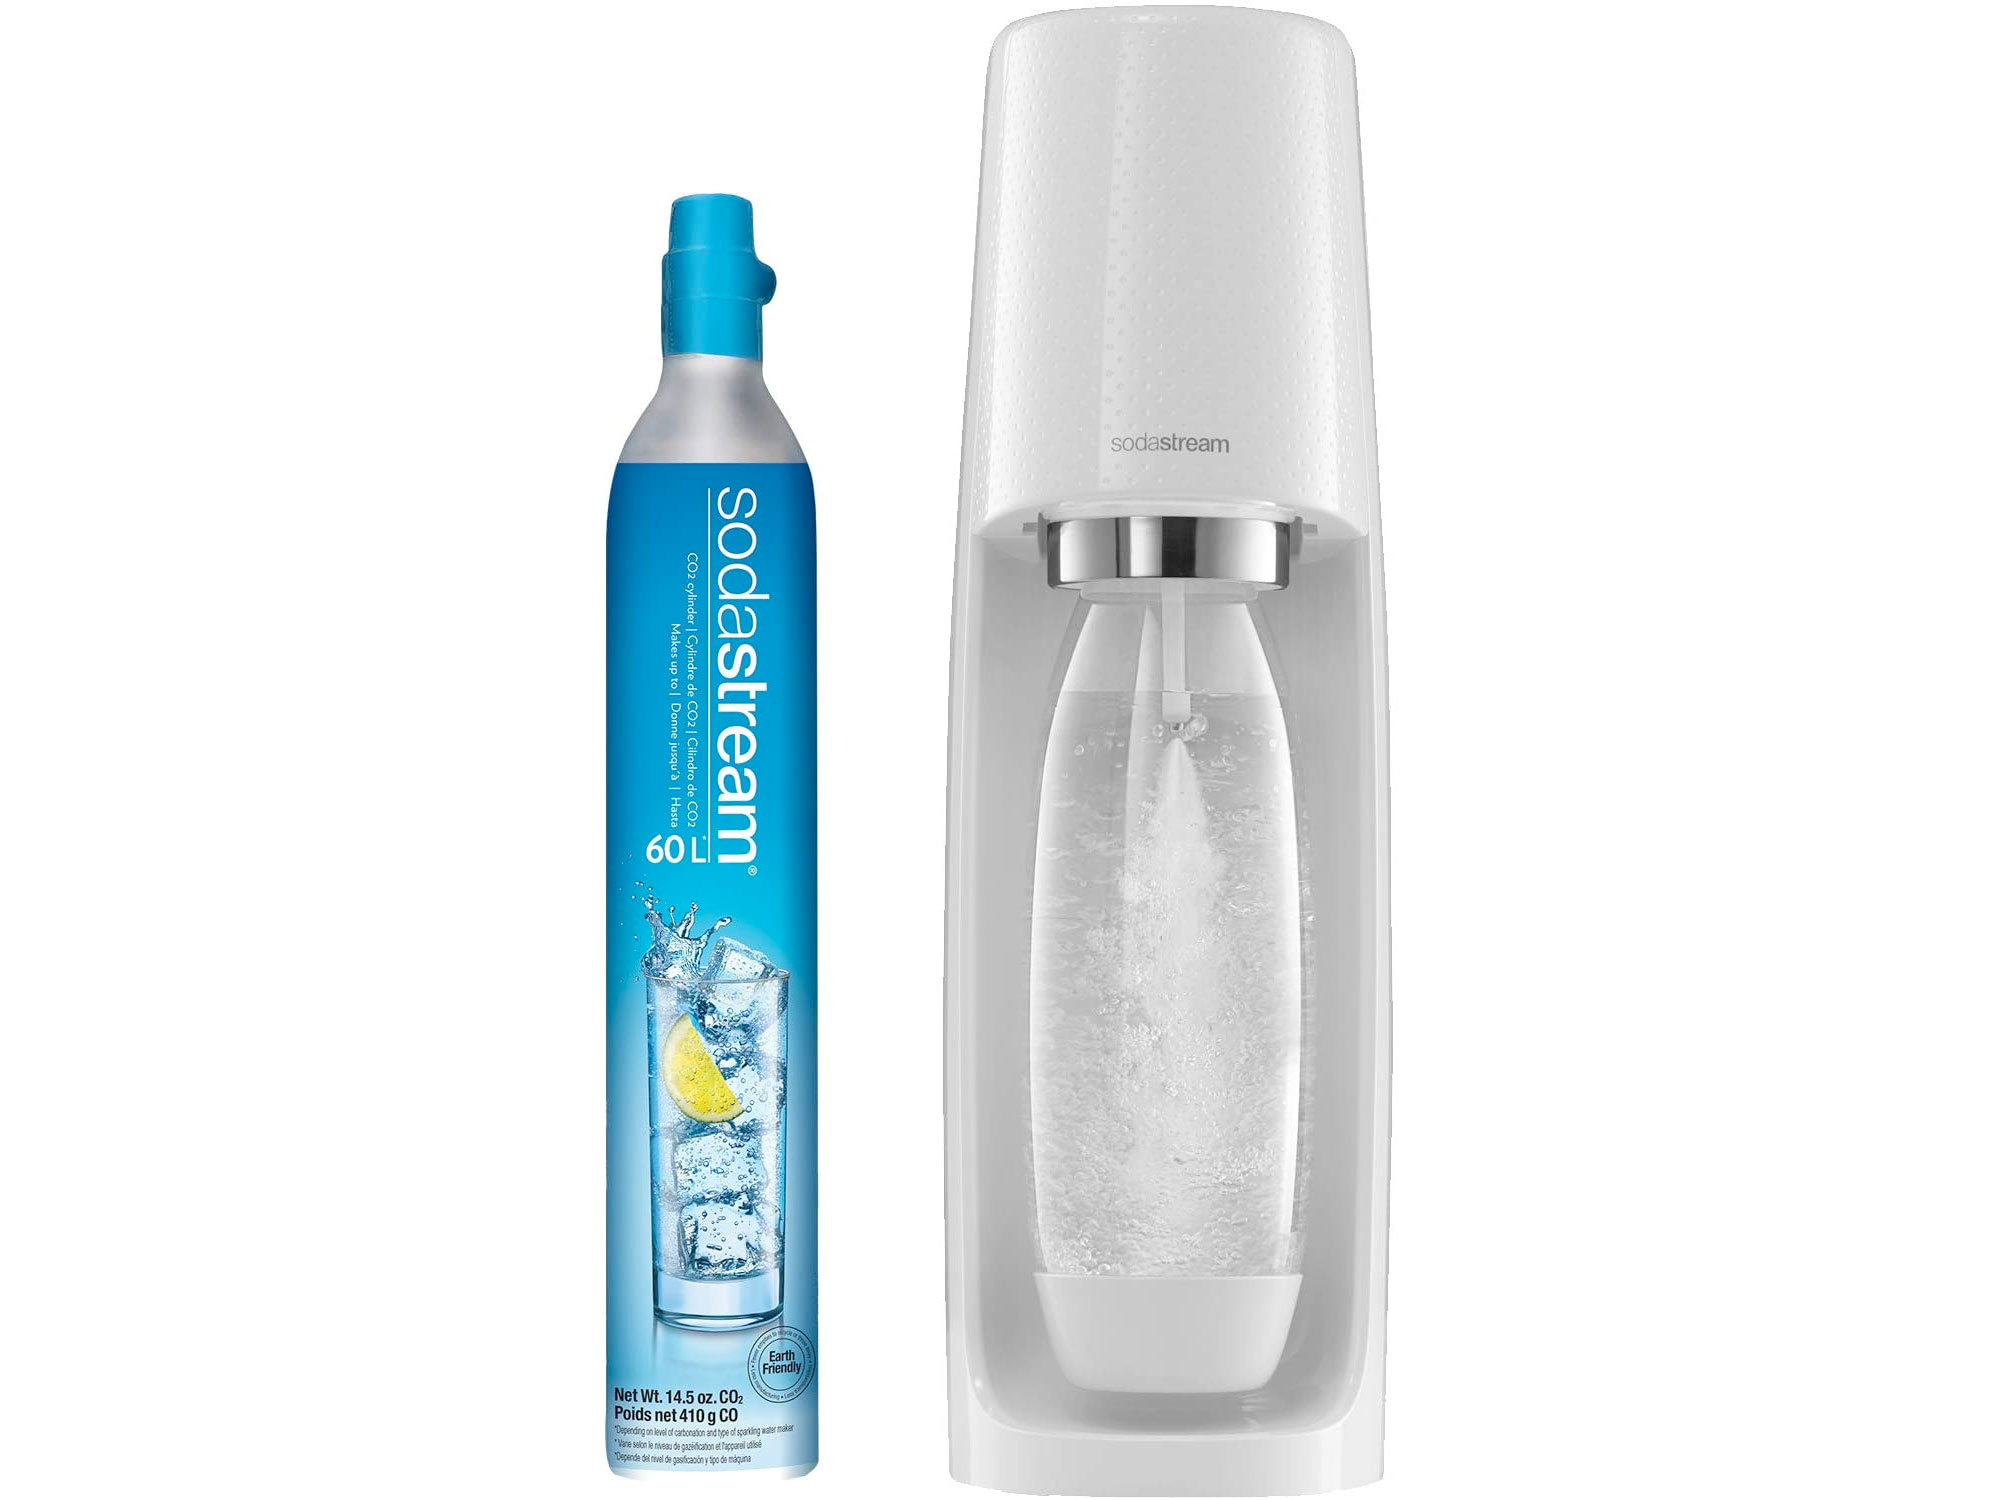 Amazon：SodaStream – Fizzi (Sparkling Water Maker) with 60L Cylinder and 1L Bottle只卖$99.99